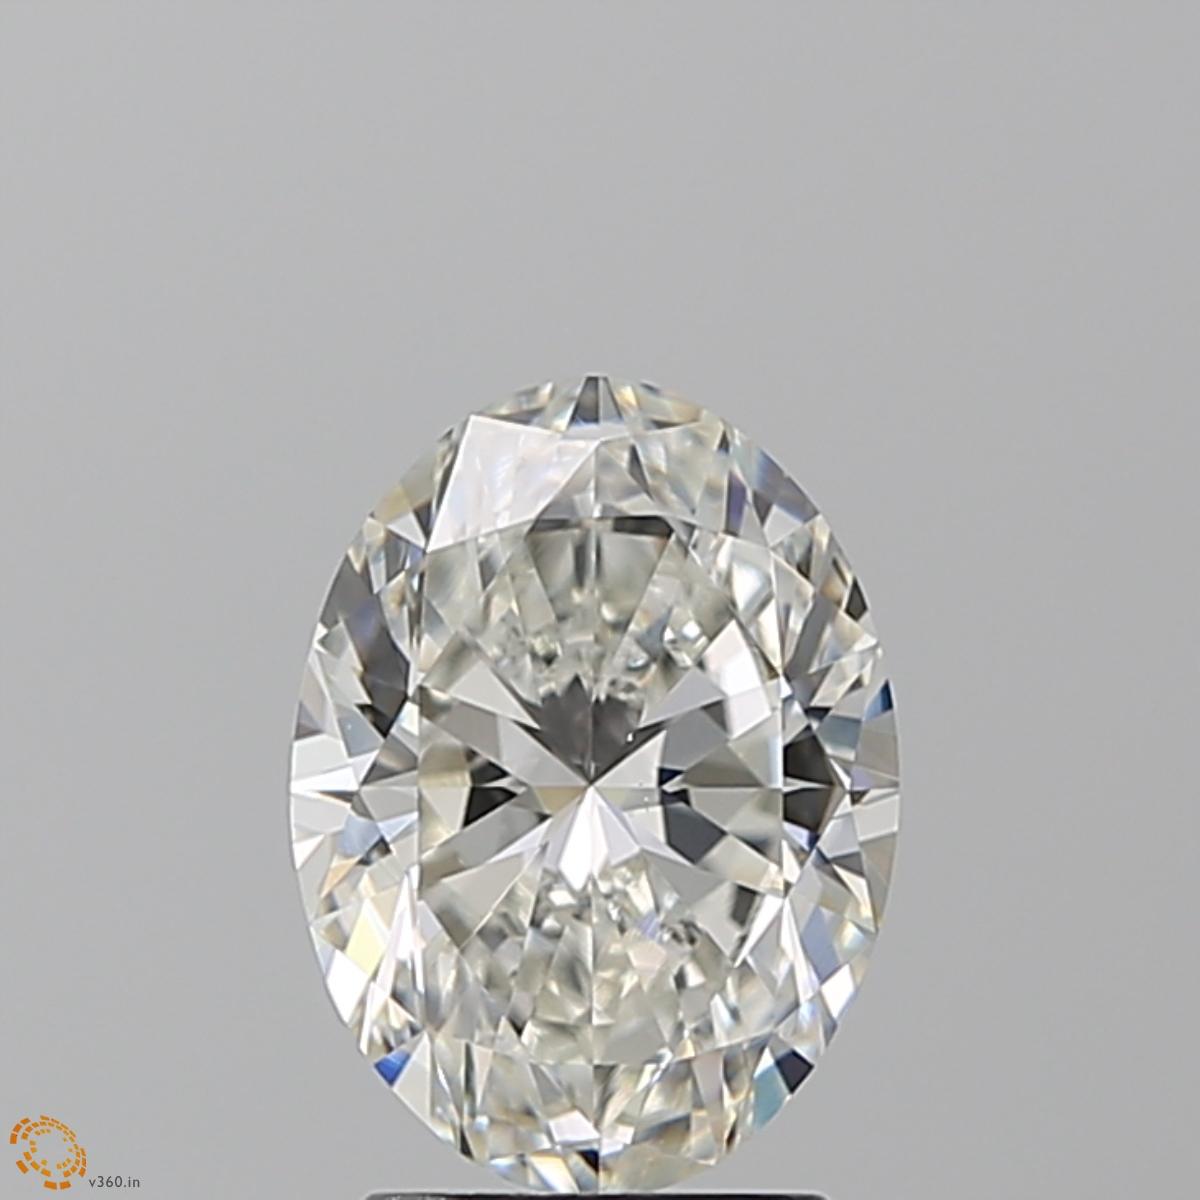 2.01 ct, F/VS1, Oval cut Diamond, 54% off Rapaport List Price (GIA Graded), Unmounted. Appraised Val